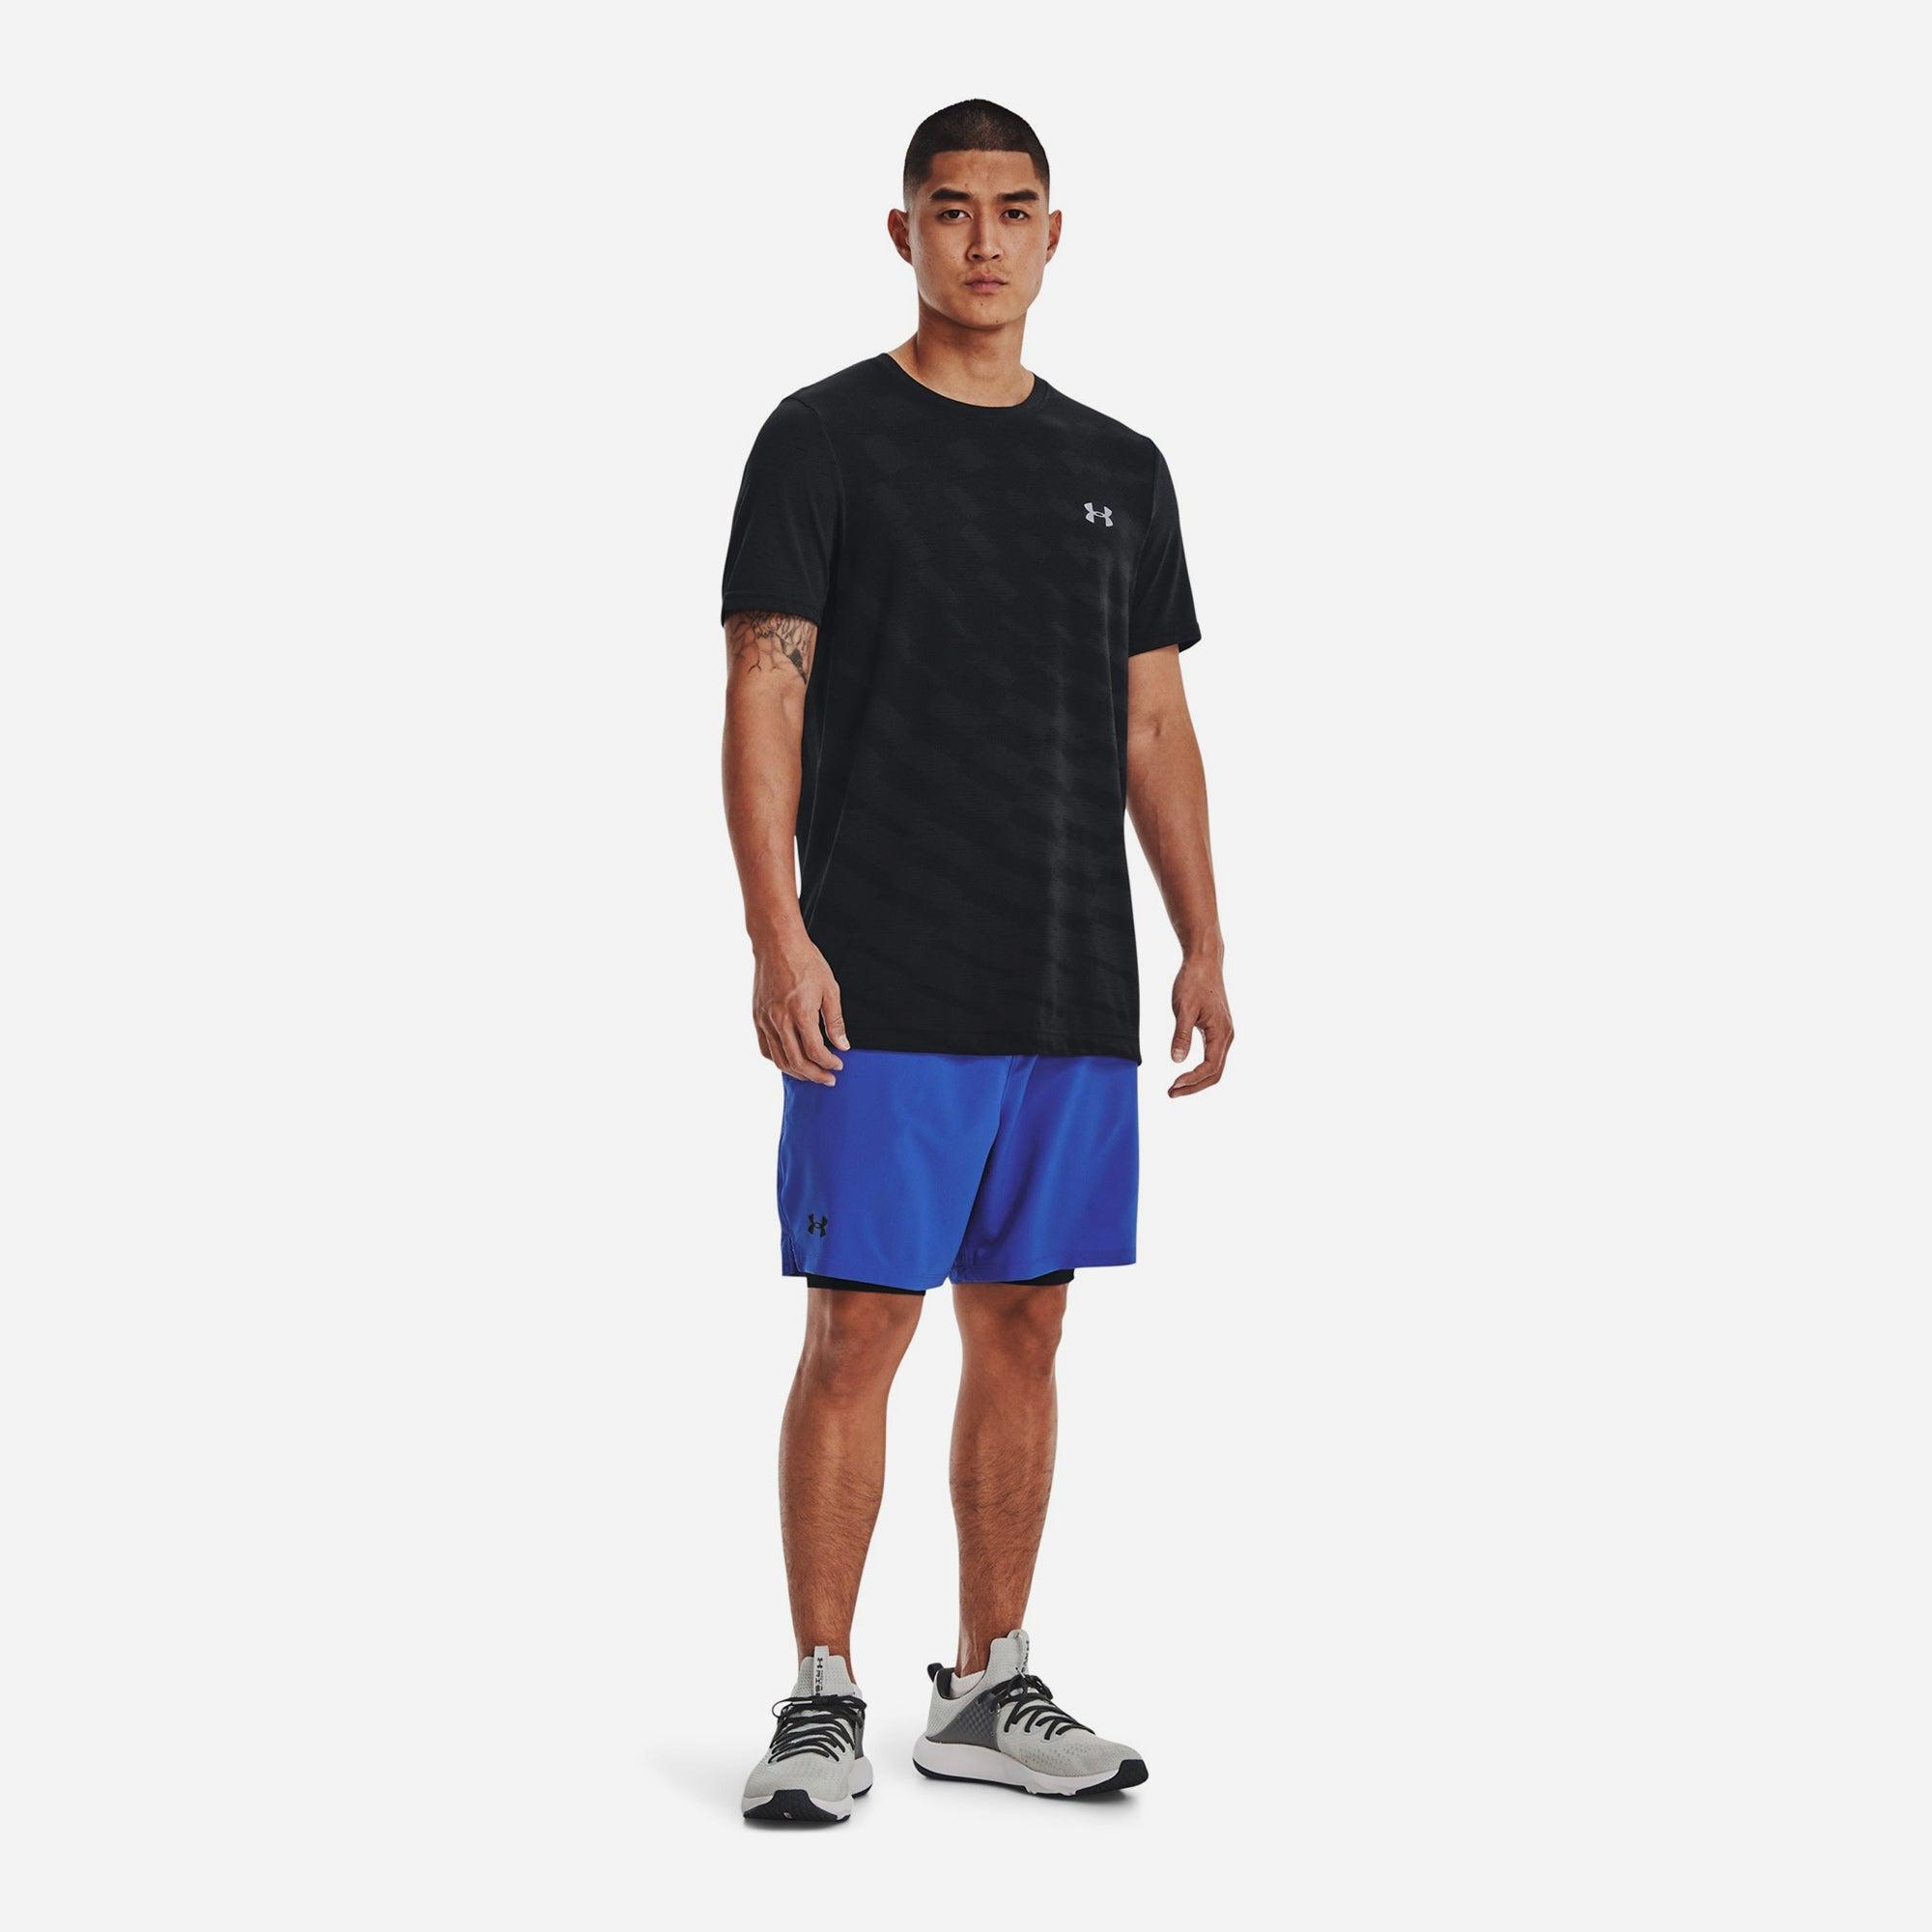 Quần ngắn thể thao nam Under Armour Vanish Woven 2In1 Sts - 1373764-486